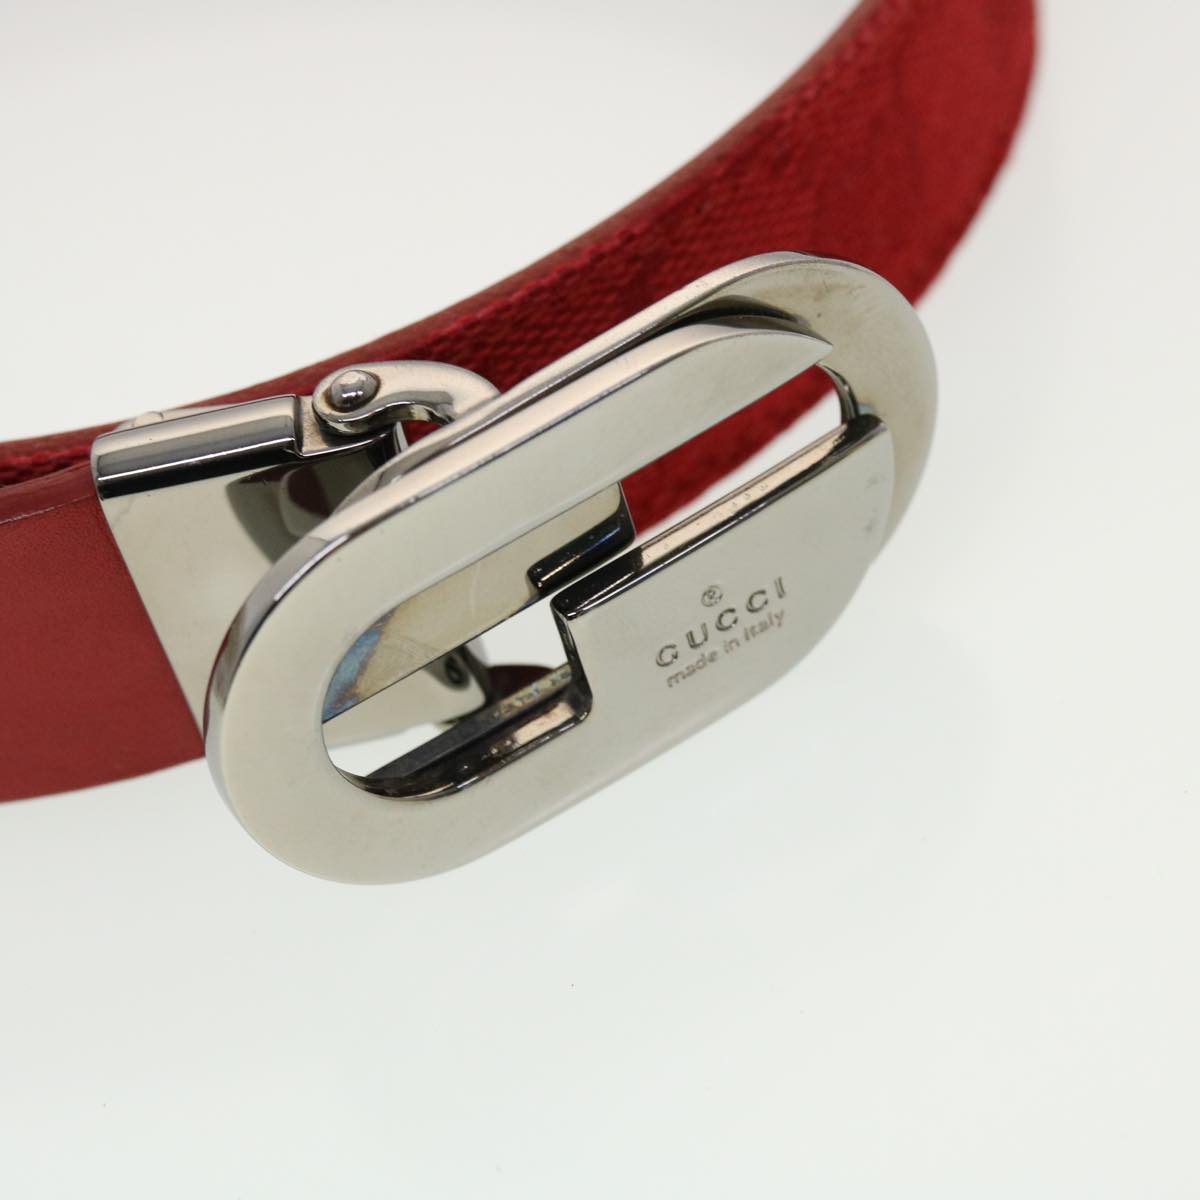 GUCCI GG Canvas Belt Leather 4Set Black Red white Auth ti1159